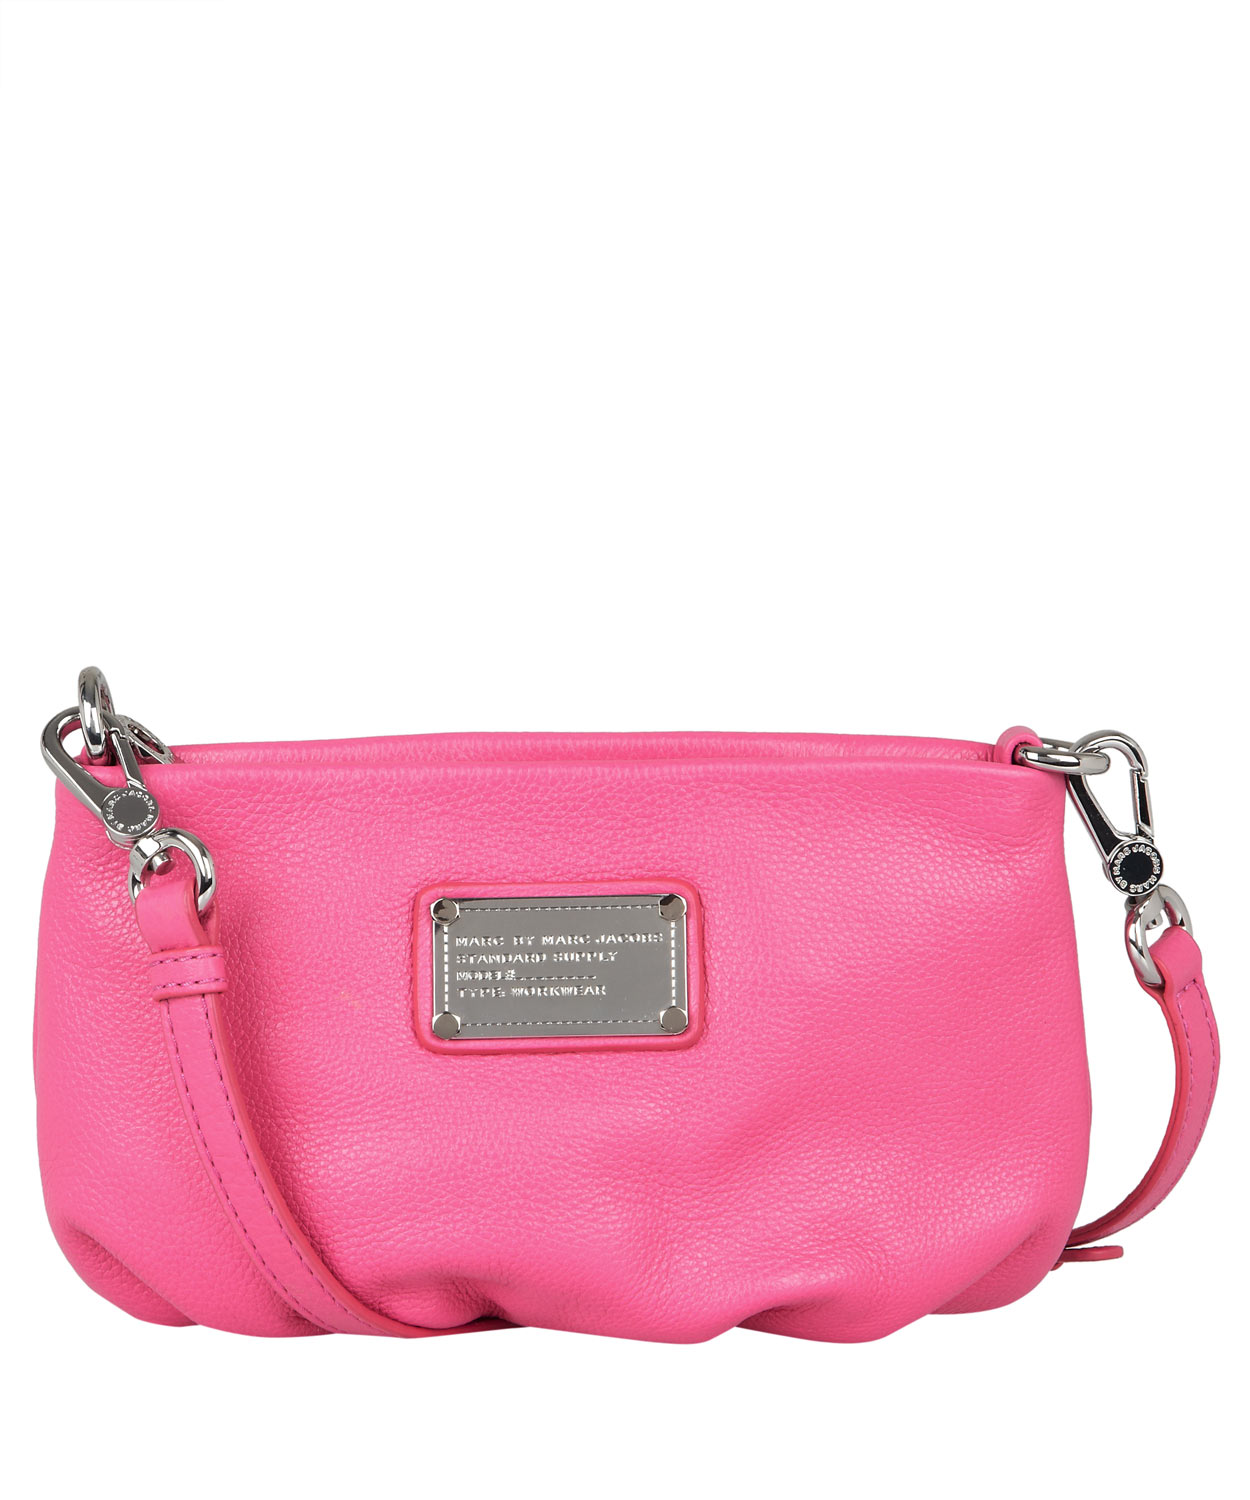 Lyst - Marc By Marc Jacobs Pink Classic Q Percy Cross Body Bag in Pink